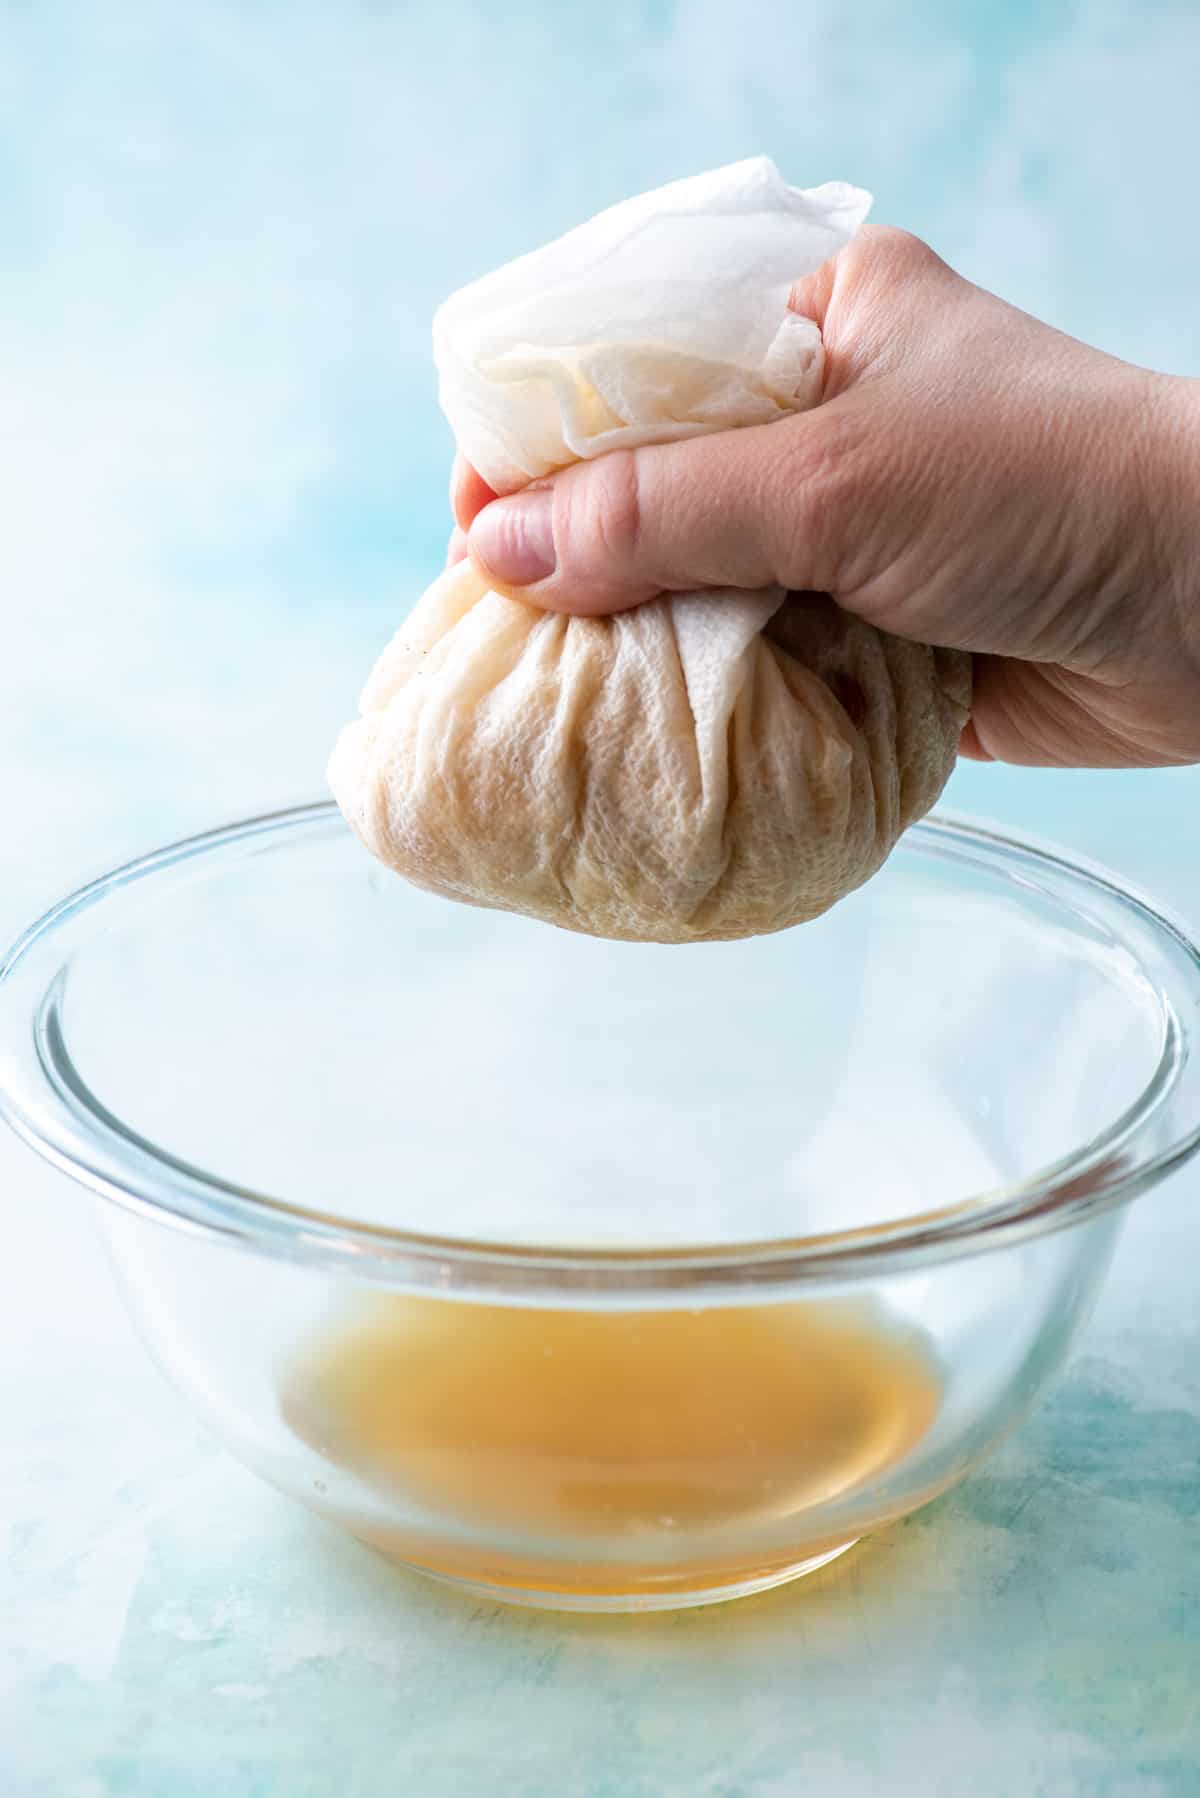 apples wrapped in paper towels being squeezed over a glass bowl to remove excess liquid